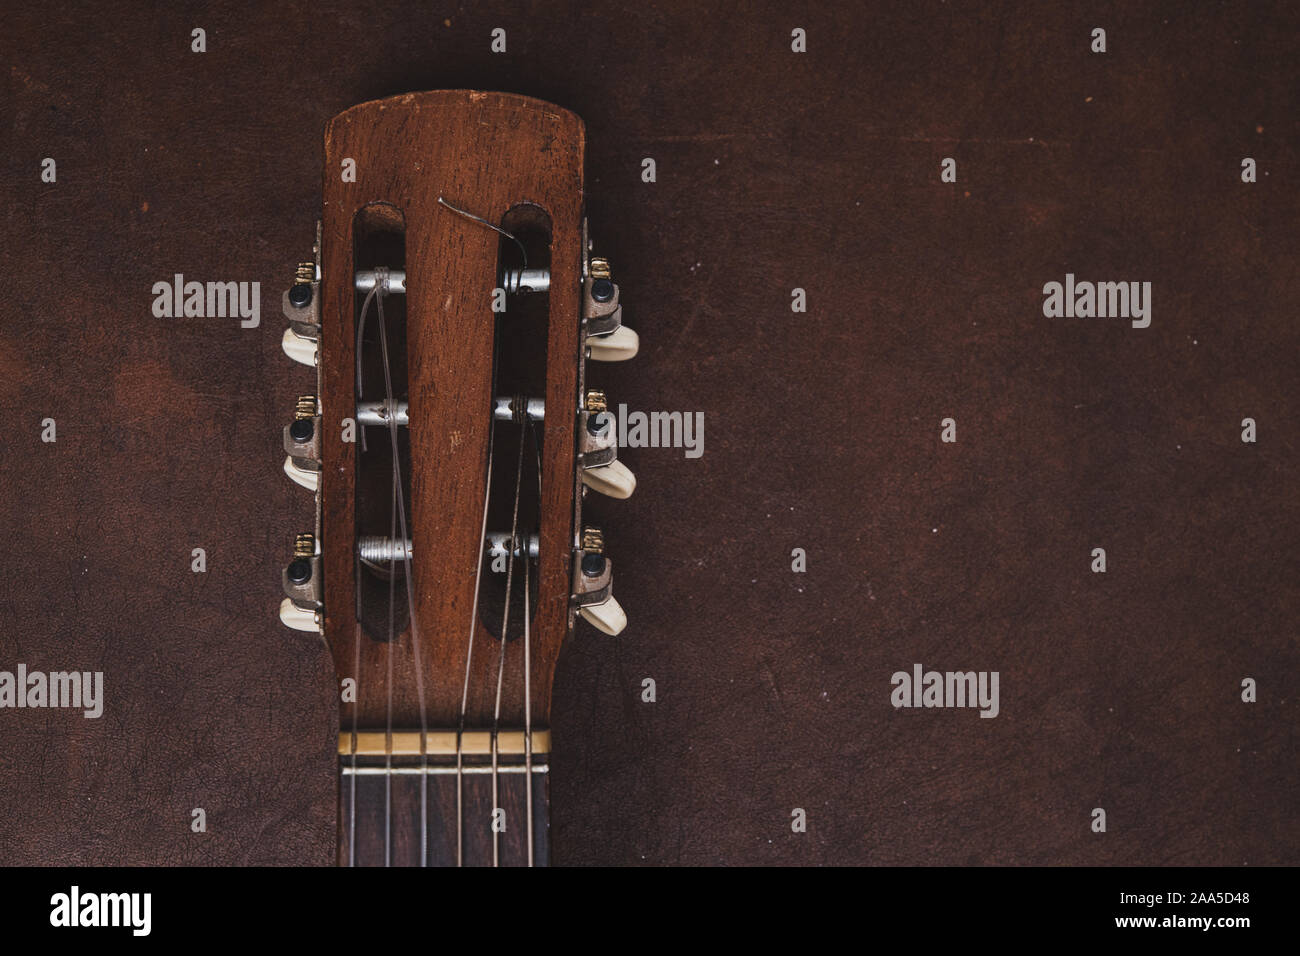 High angle view vintage old fashioned acoustic guitar head and tuning pegs detail on  wooden background Stock Photo